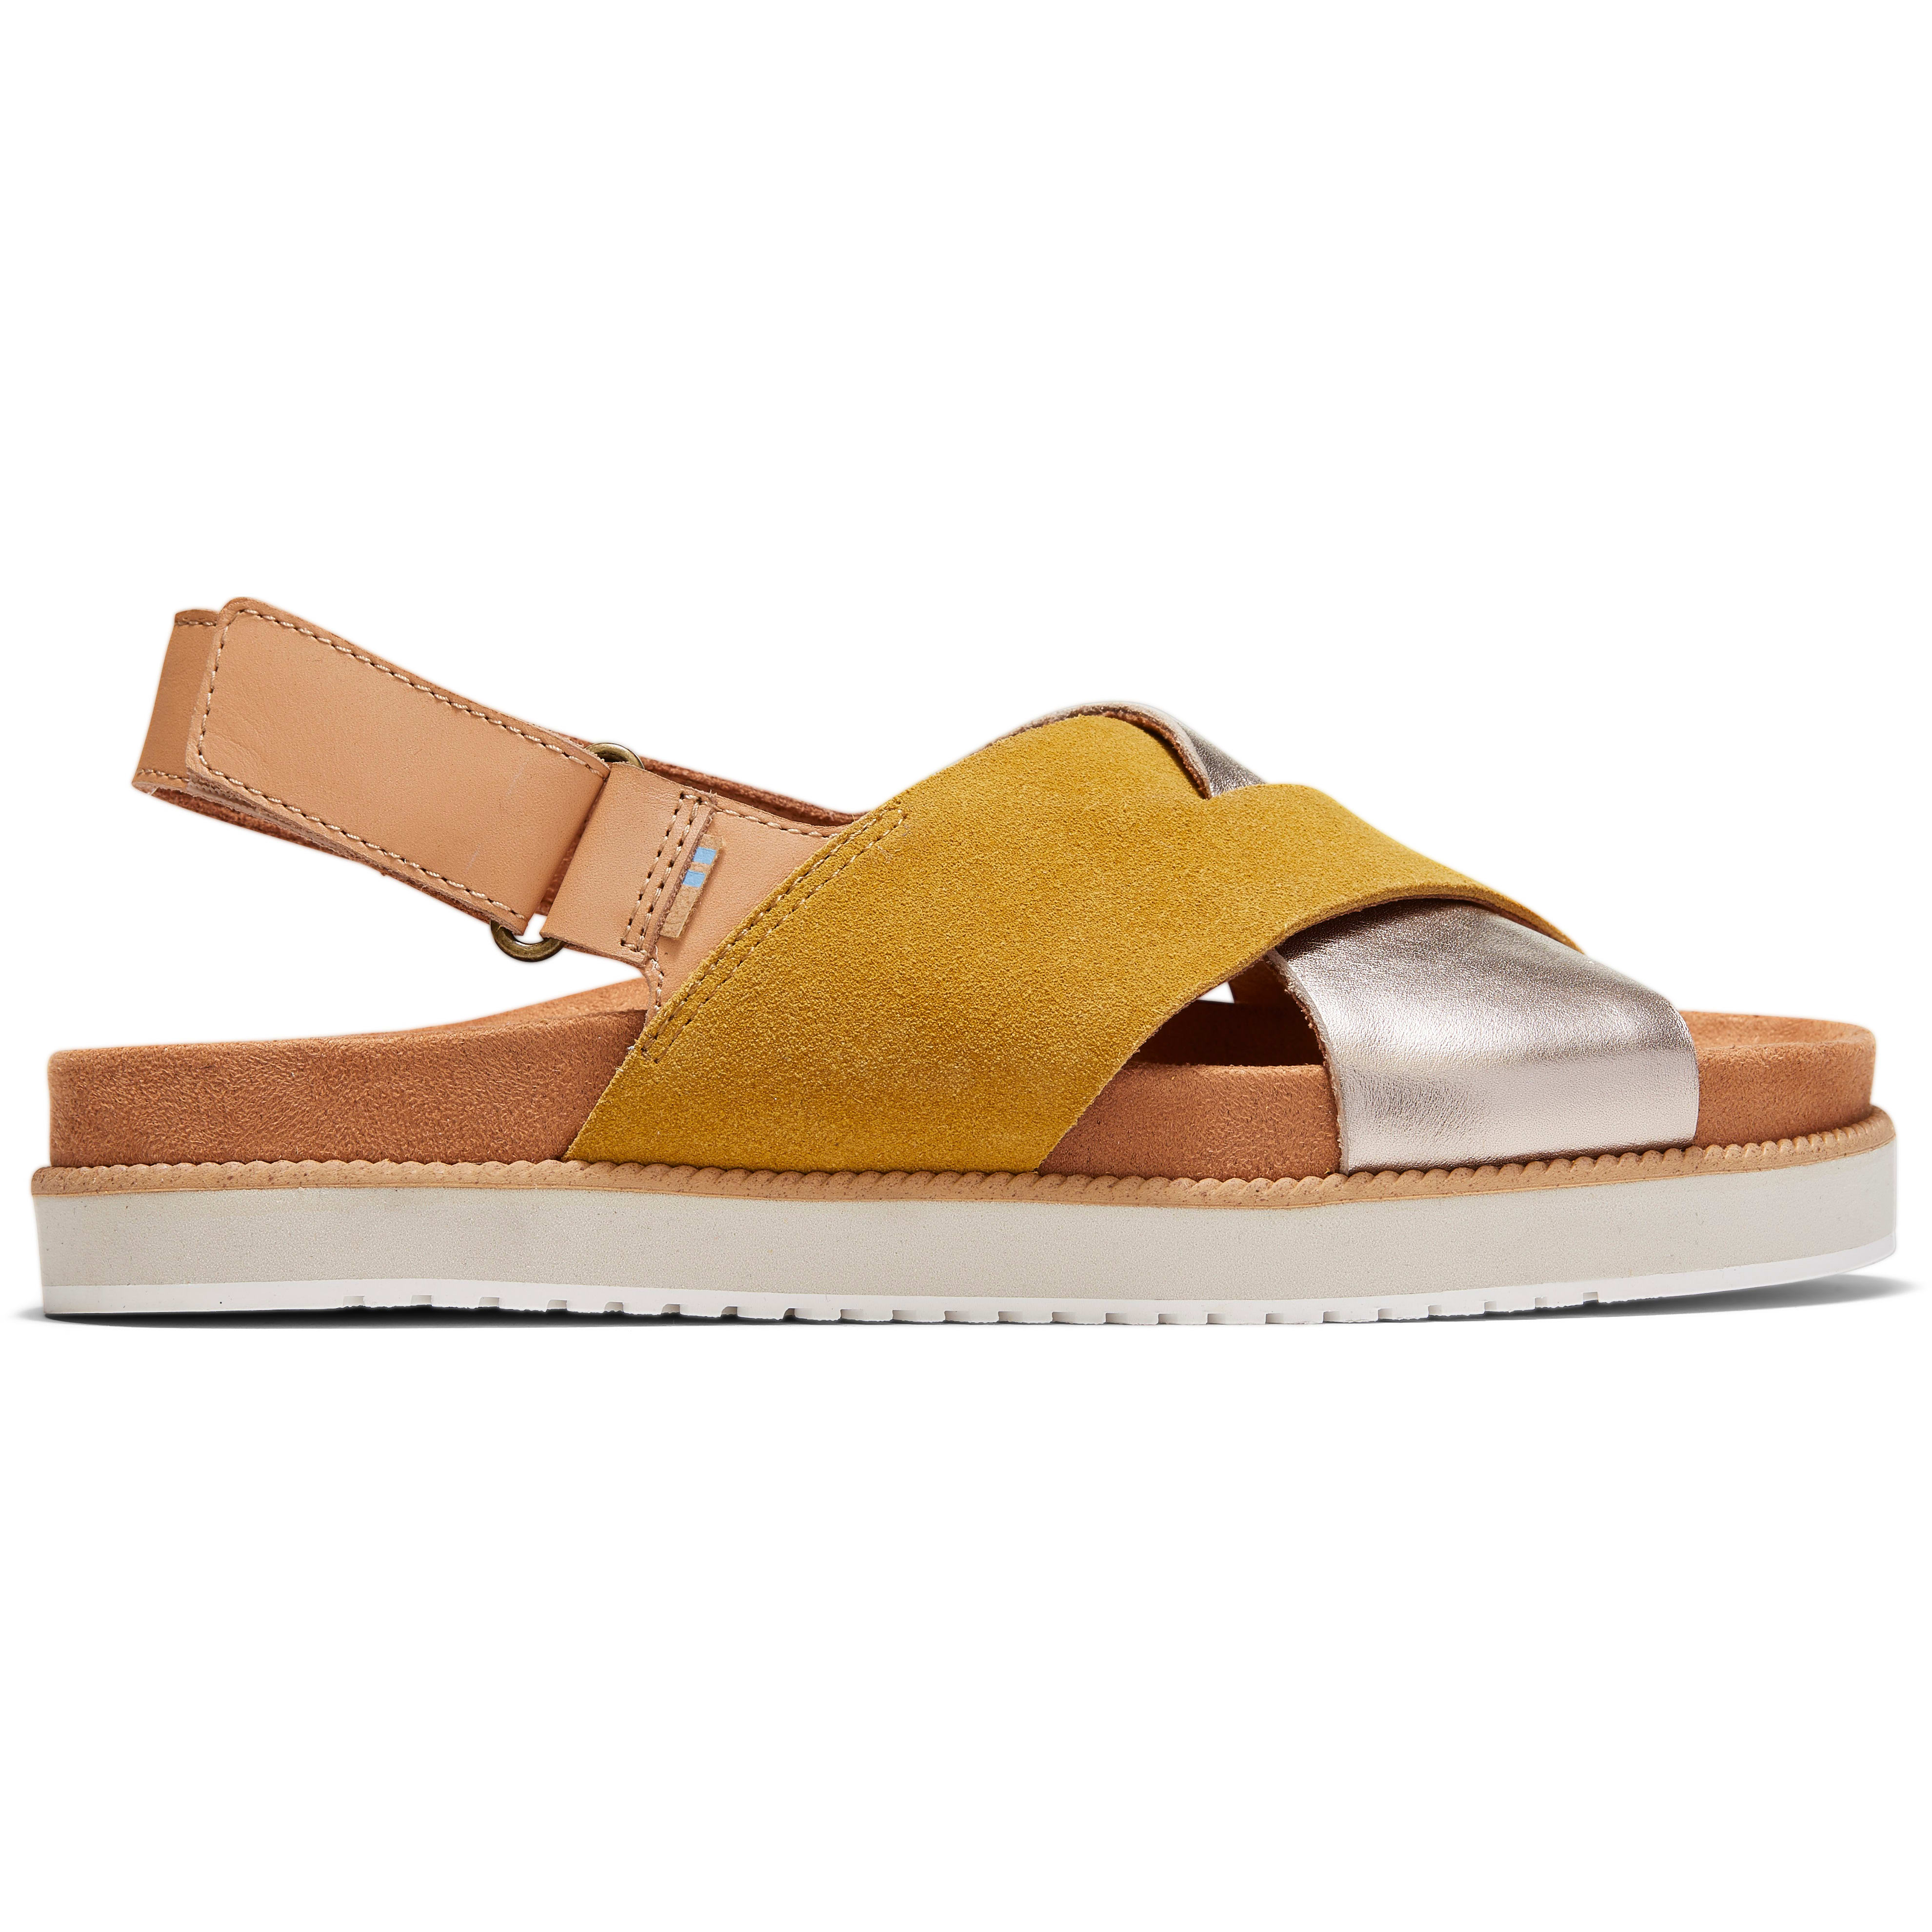 TOMS Women's Marisa Sandal from Outnorth